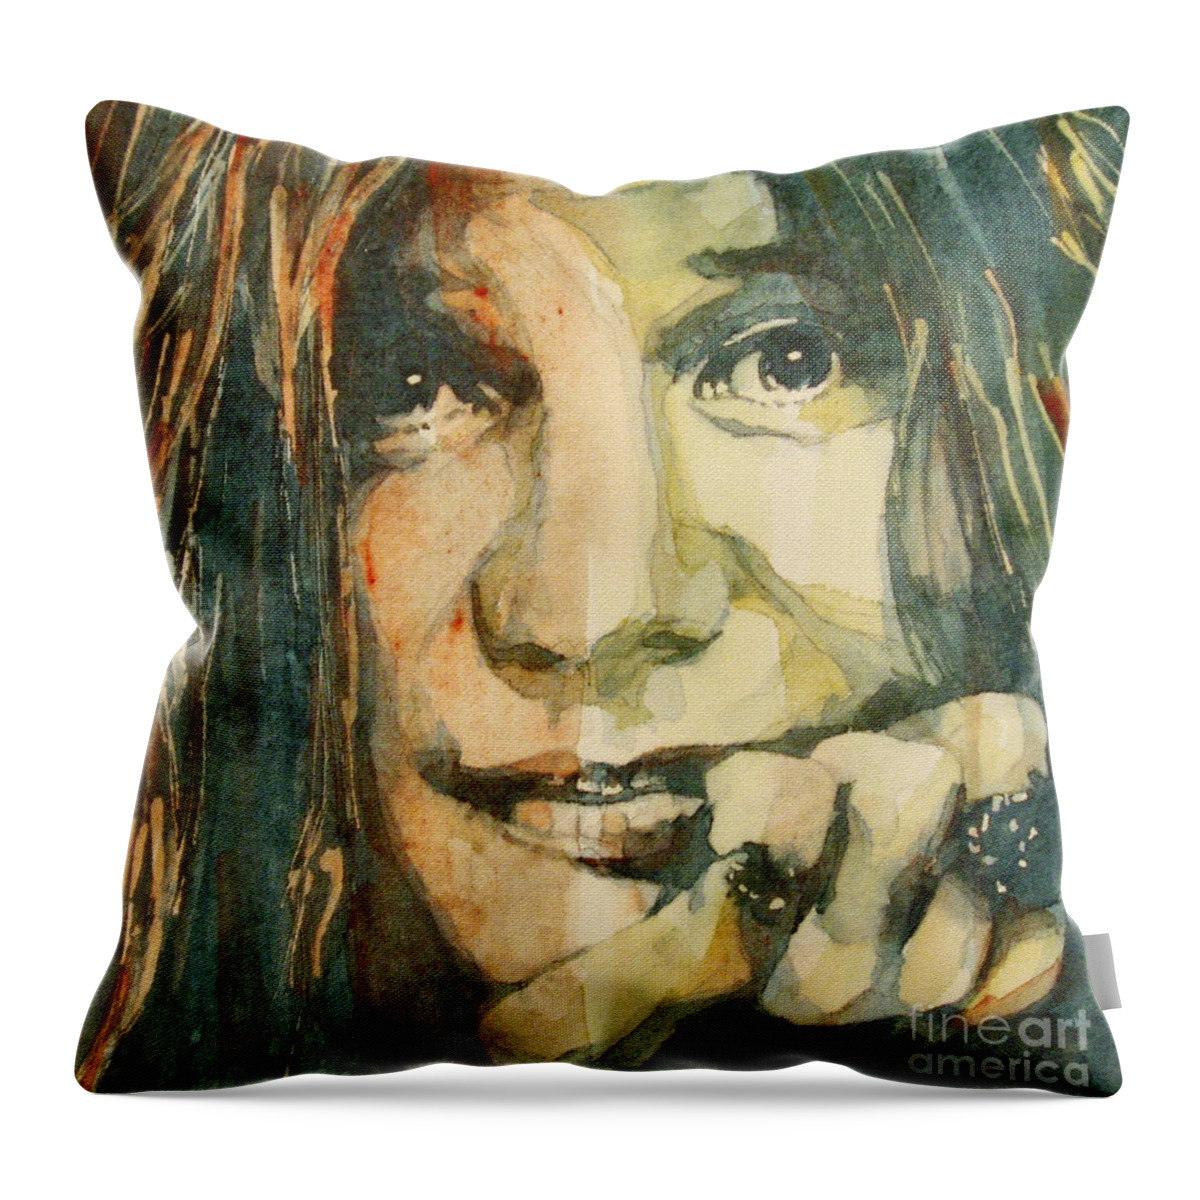 Janis Joplin Throw Pillow featuring the painting Mercedes Benz by Paul Lovering